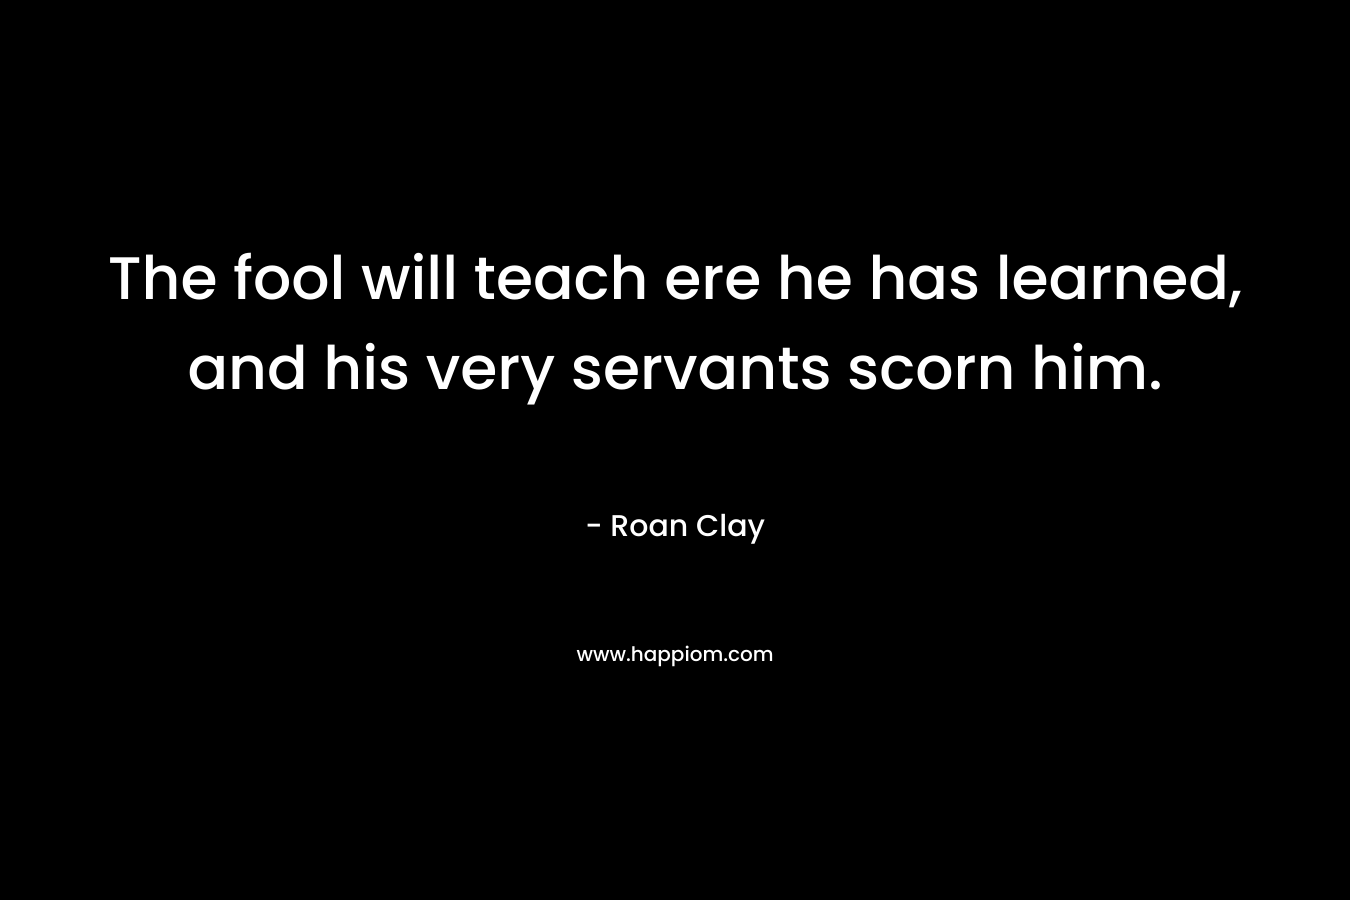 The fool will teach ere he has learned, and his very servants scorn him. – Roan Clay